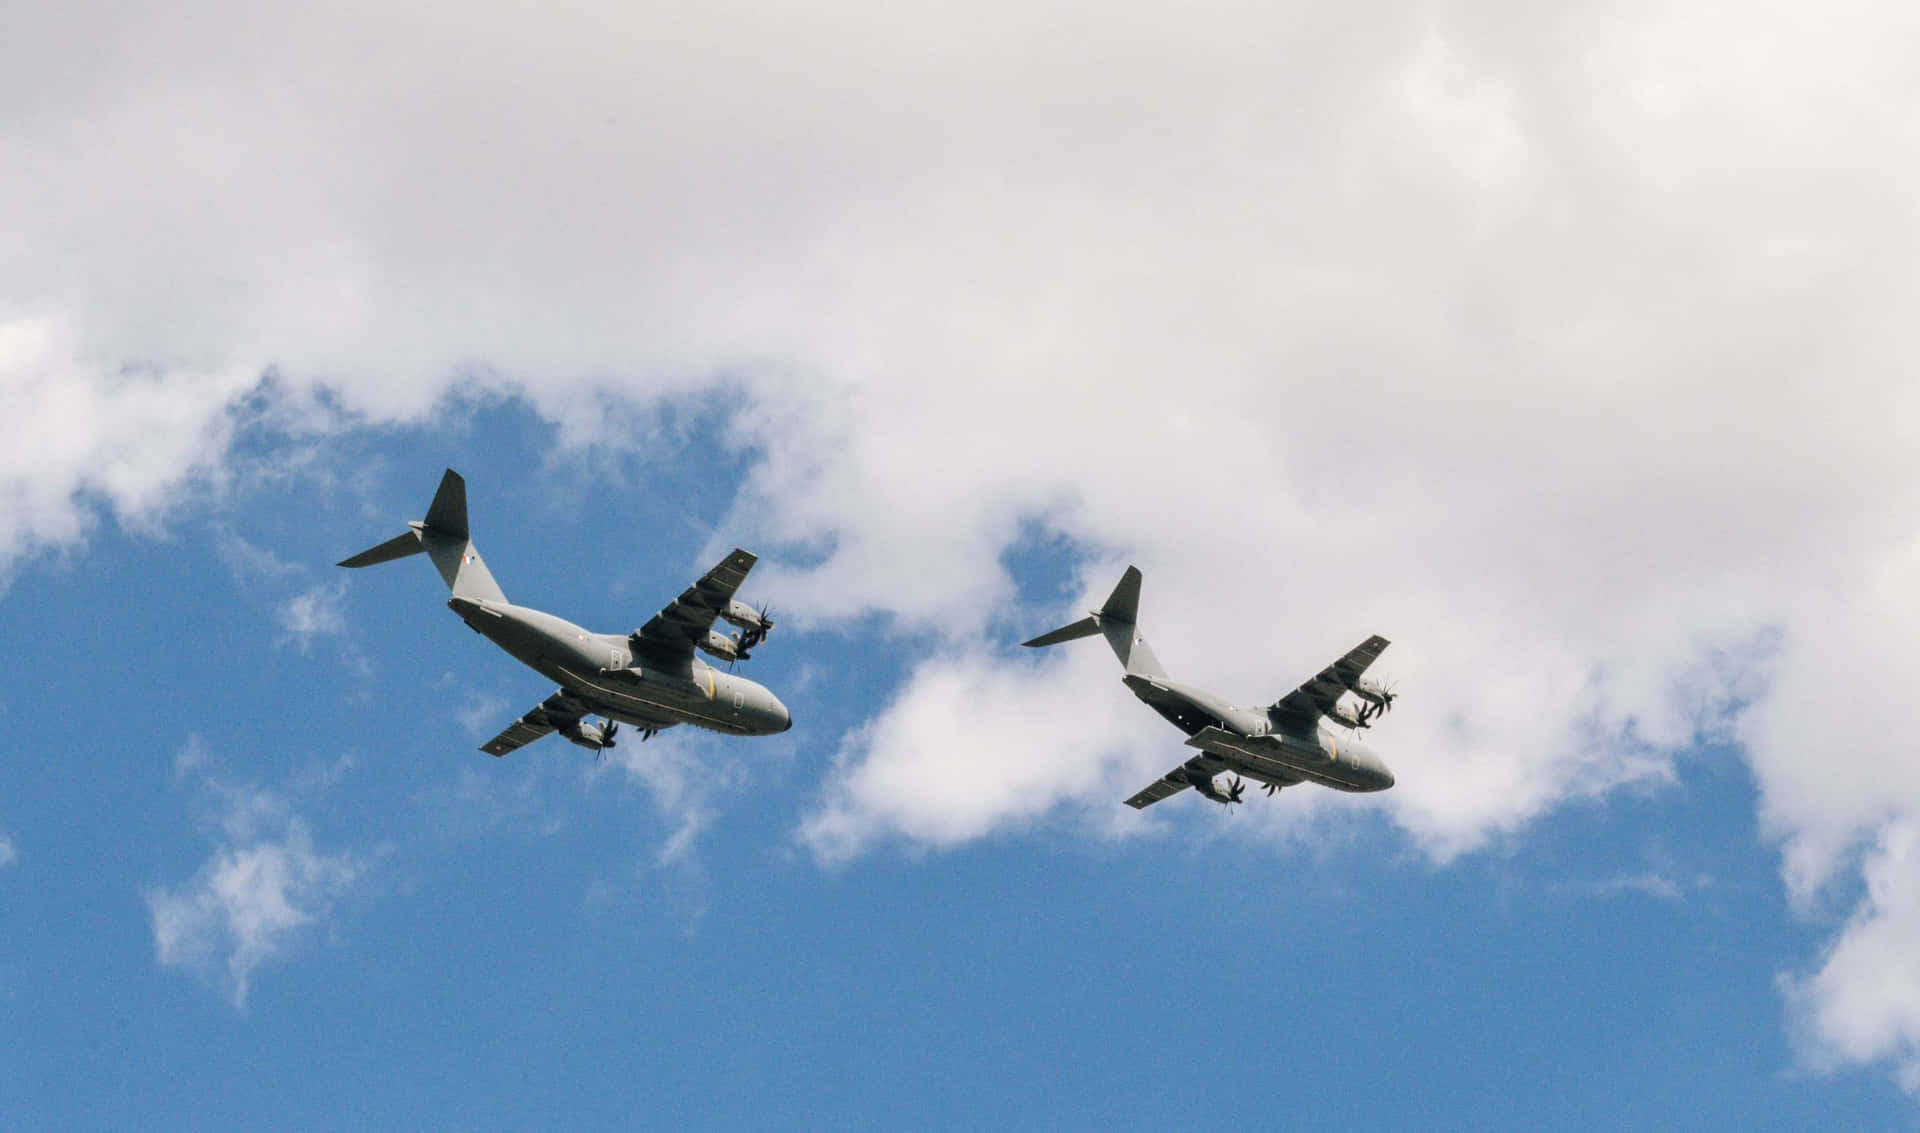 Two Military Planes Flying In The Sky